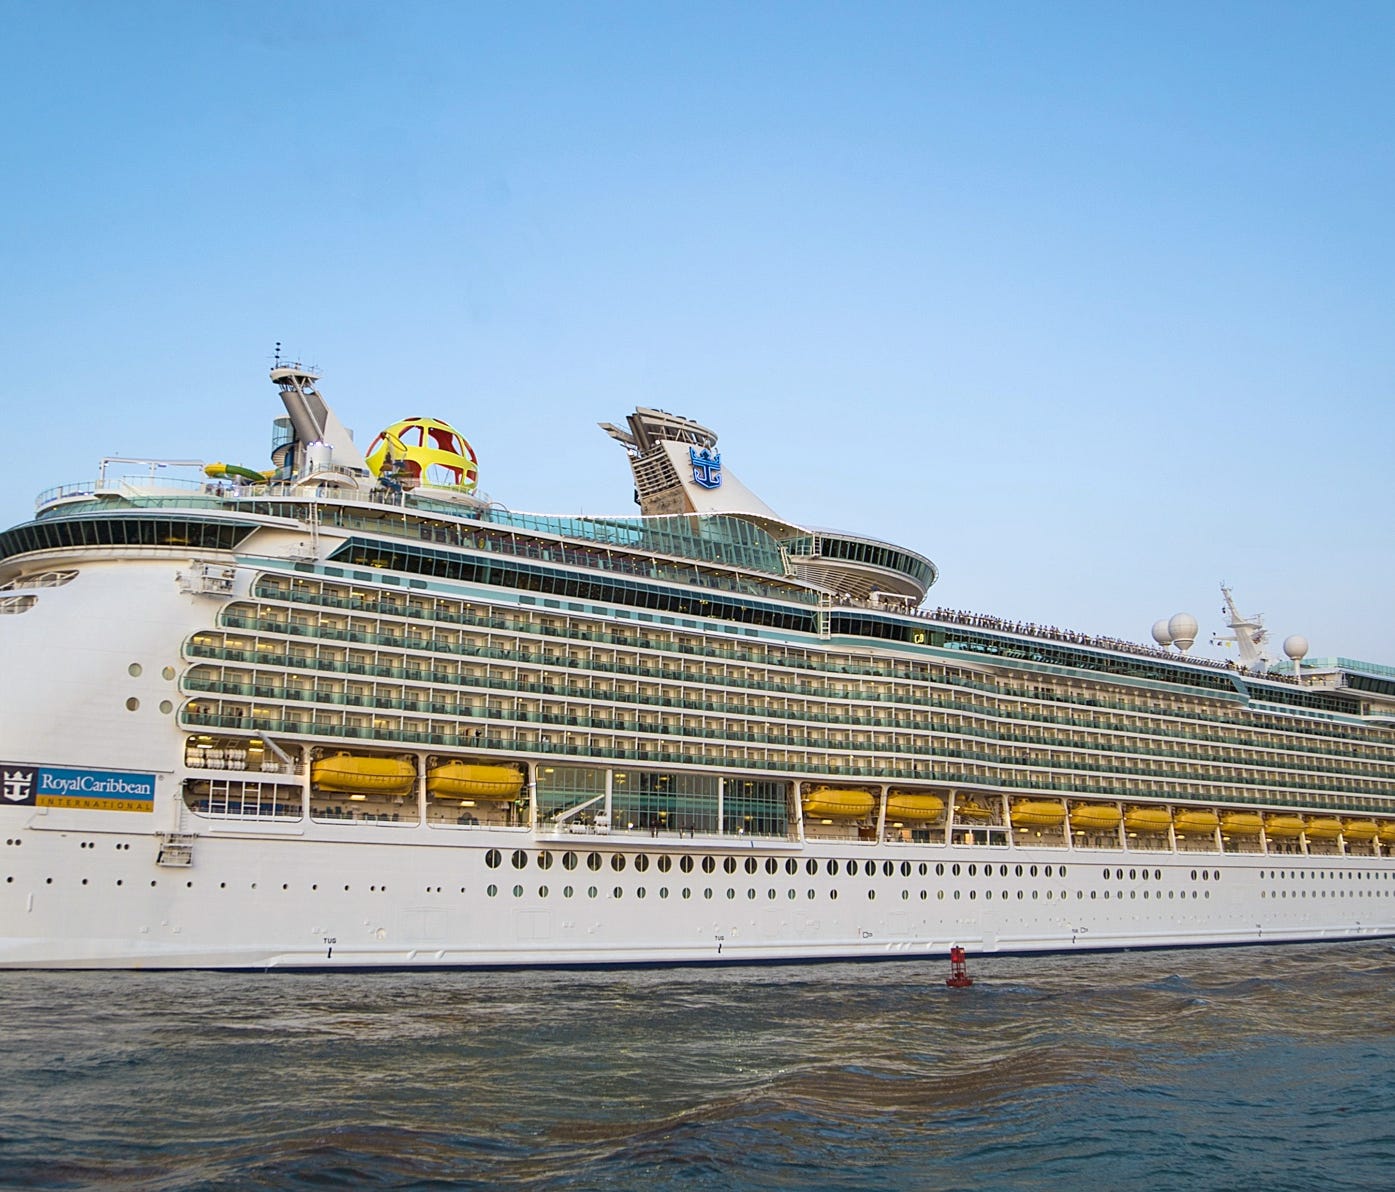 Royal Caribbean's 3,114-passenger Mariner of the Seas has emerged from a major, $120 million makeover that included the addition of new deck-top water slides, a FlowRider surfing pool, a virtual reality bungee trampoline experience and other fun-focu